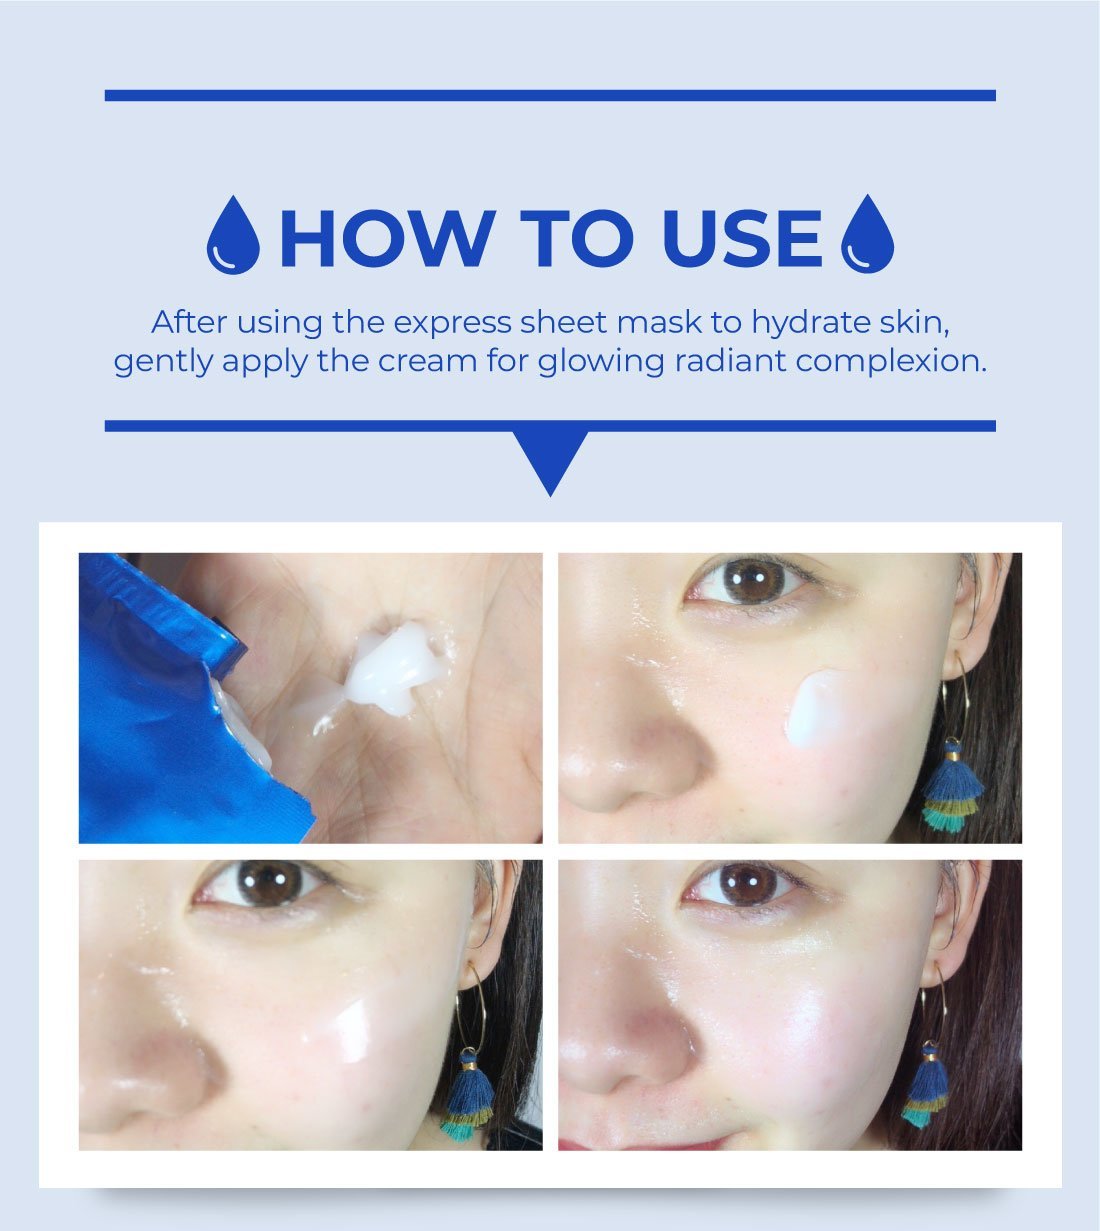 2-Step Whitening Mask - How to use